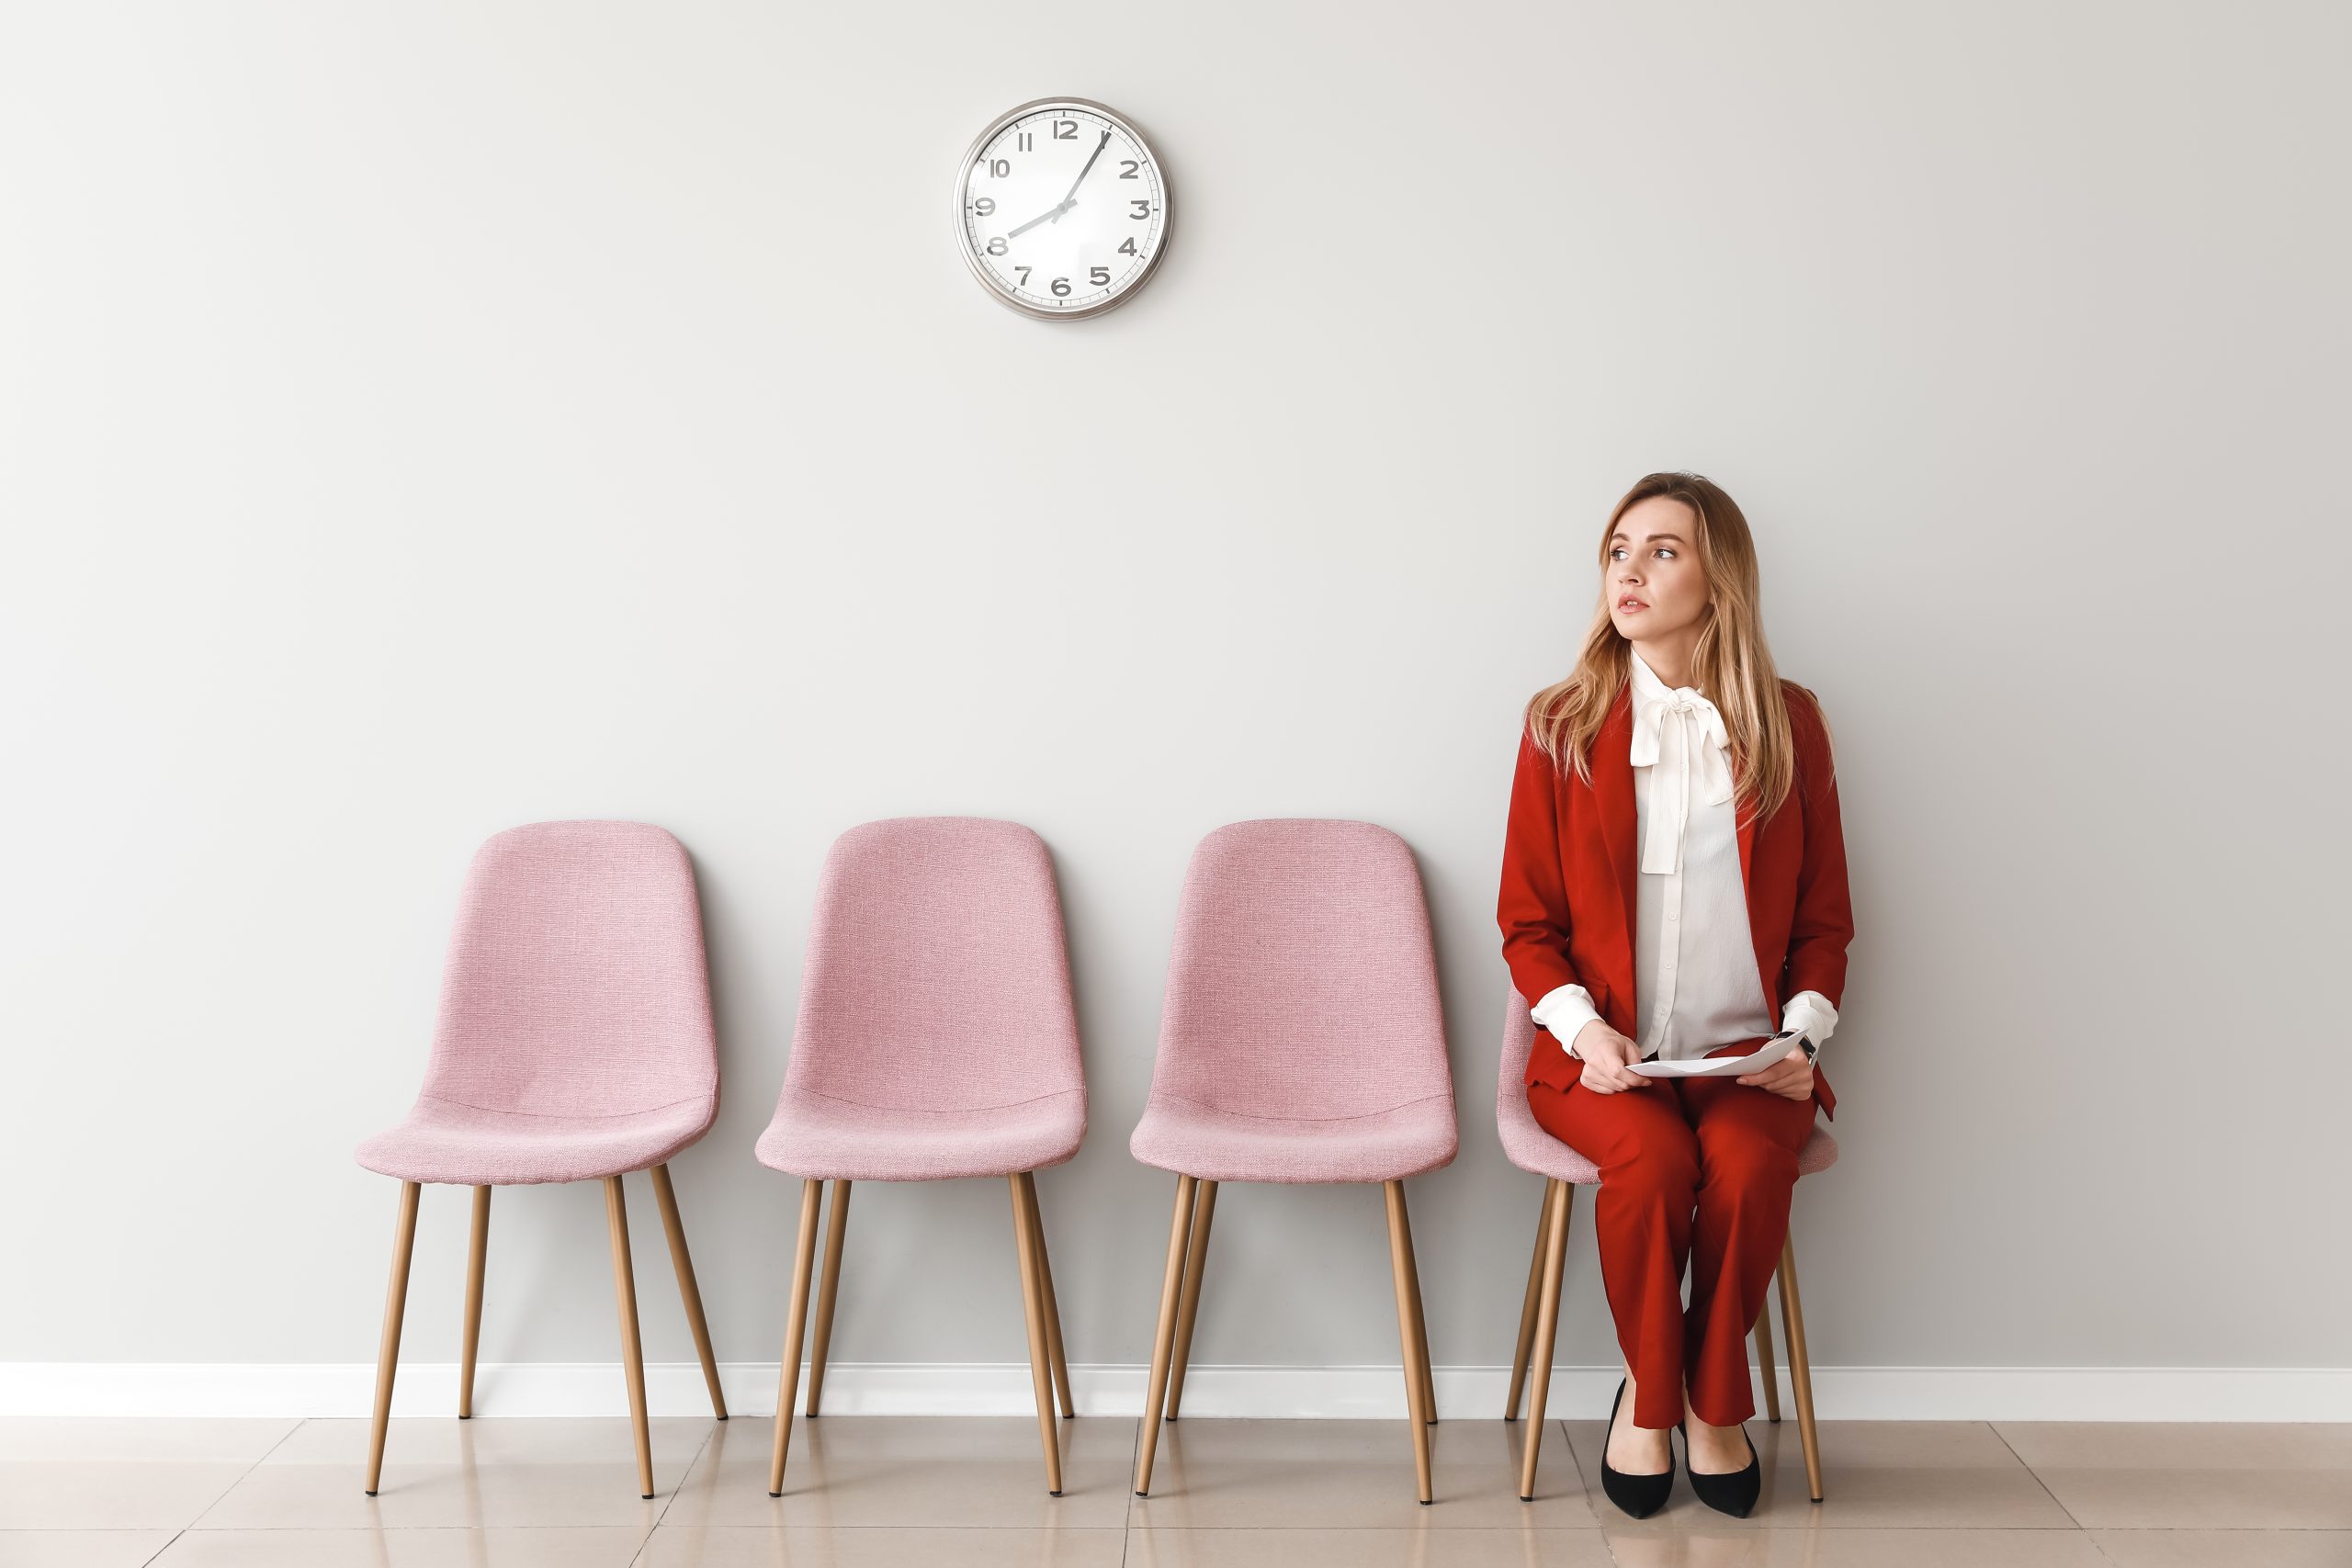 A professional woman is interviewing at a non-profit. She is sitting in a chair in a hallway while waiting for her job interview.